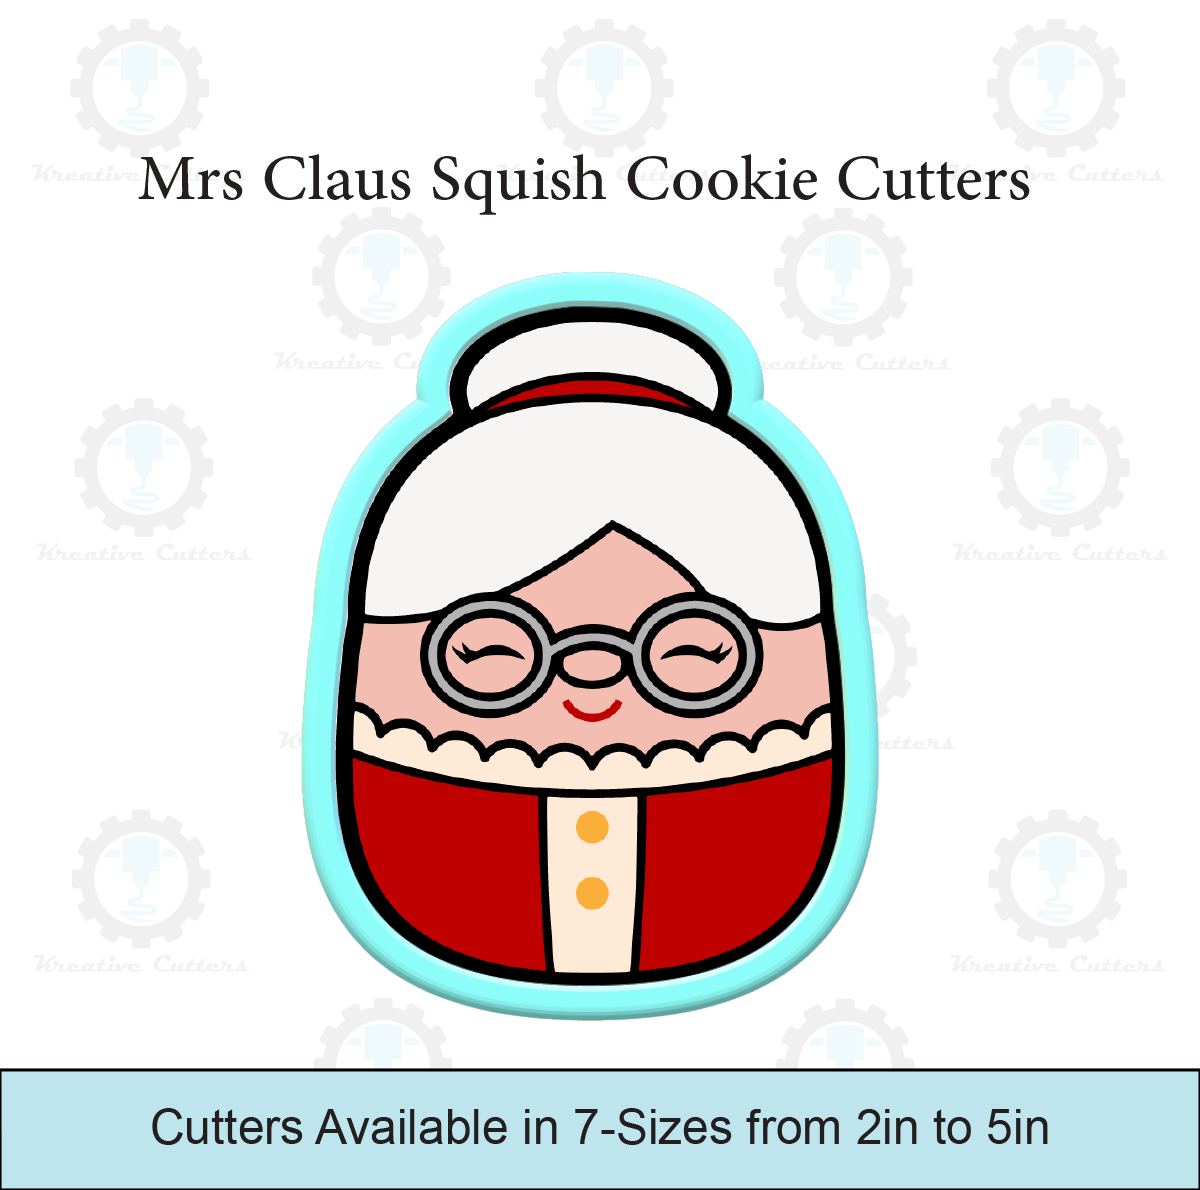 Mrs Claus Squish Cookie Cutters